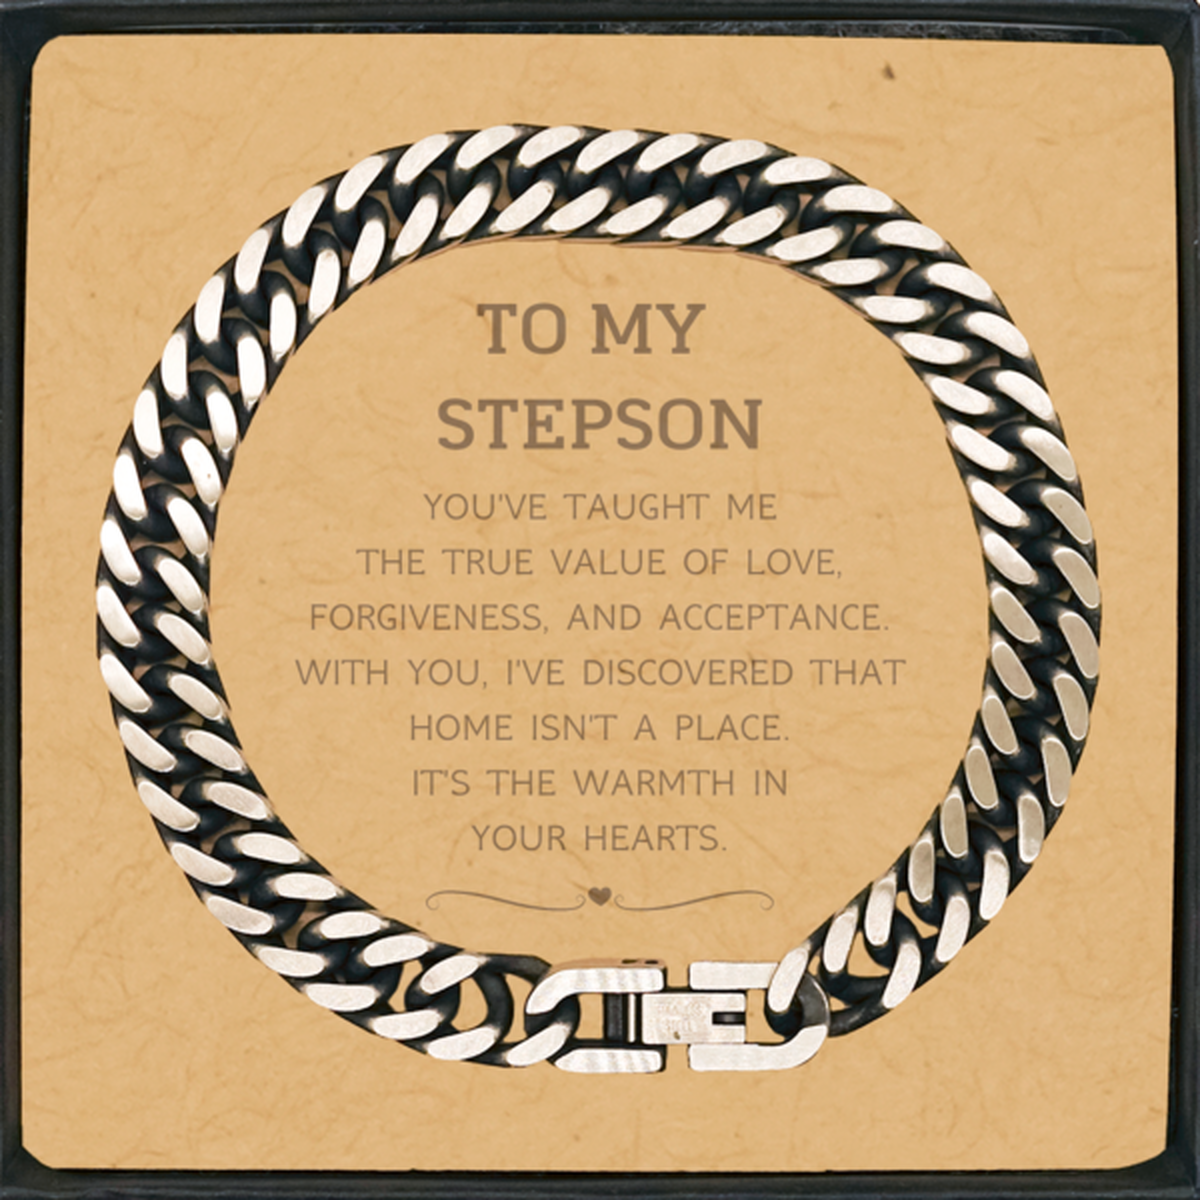 To My Stepson Gifts, You've taught me the true value of love, Thank You Gifts For Stepson, Birthday Cuban Link Chain Bracelet For Stepson